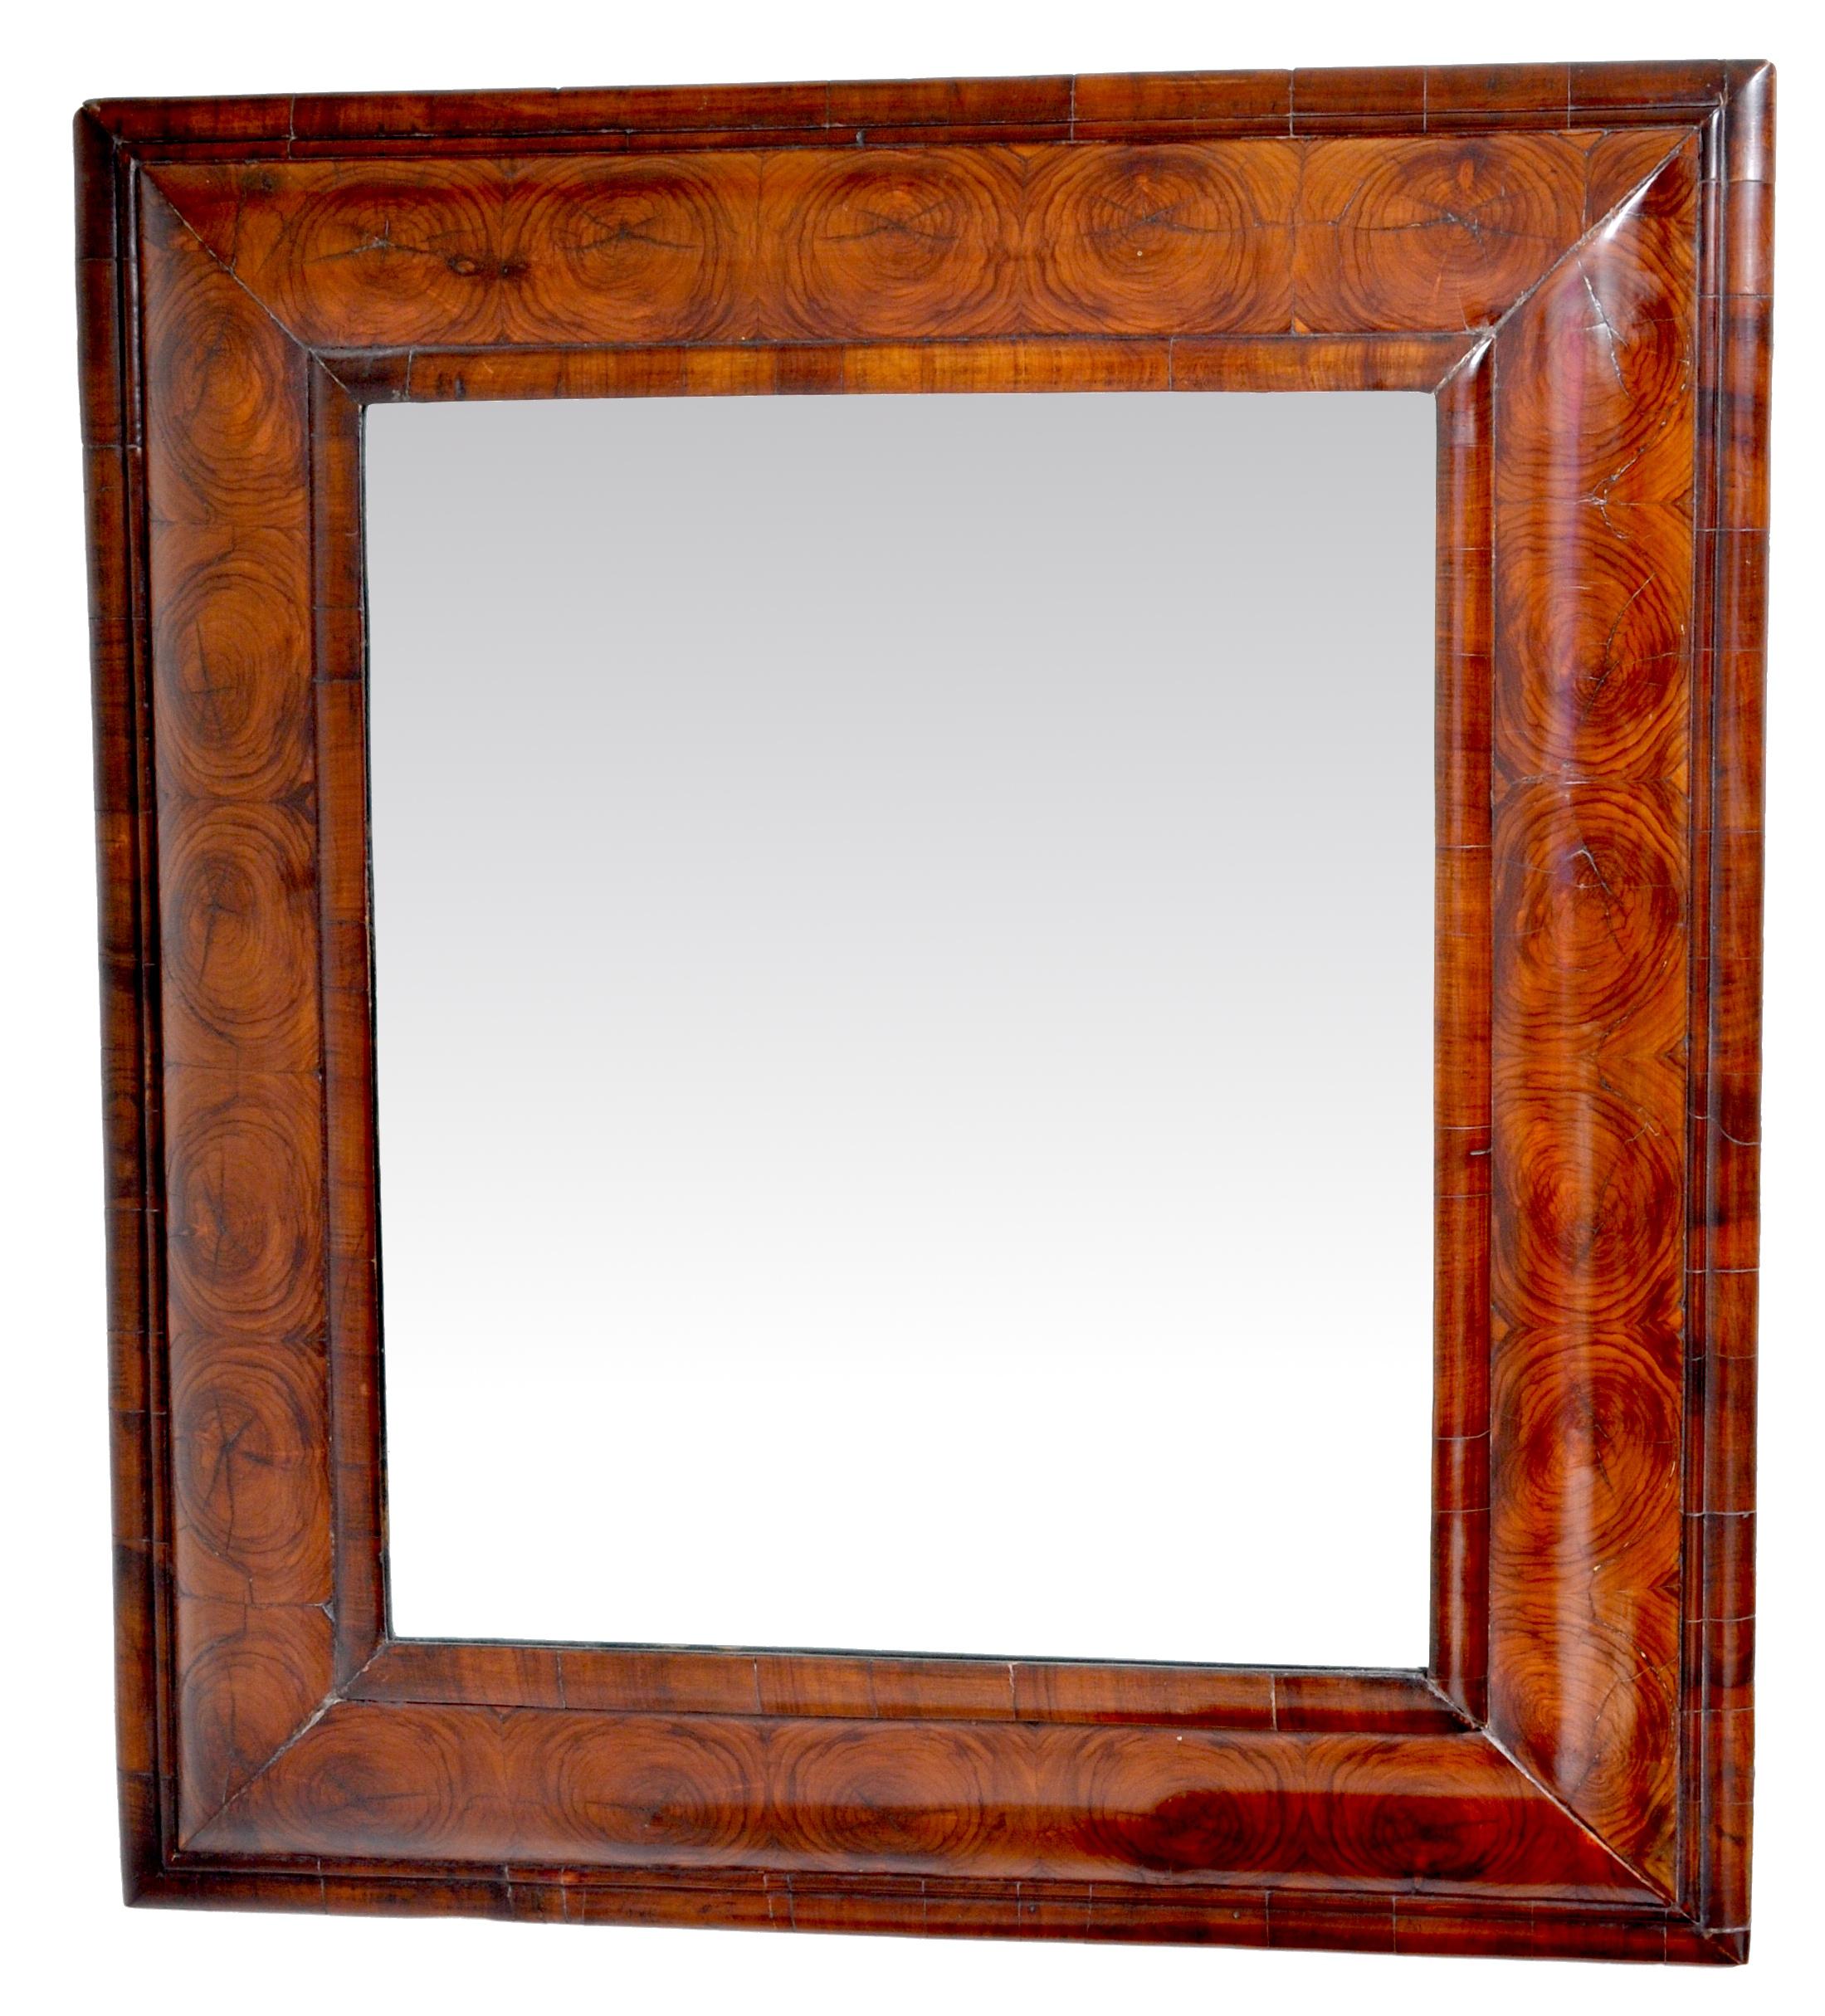 Antique William & Mary Laburnum oyster veneer cushion-shaped mirror, circa 1690. A fine William and Mary oyster veneered mirror from 1690, the rectangular mirror plate within a cushion-molded frame and having finely cut oyster-shaped molding. The